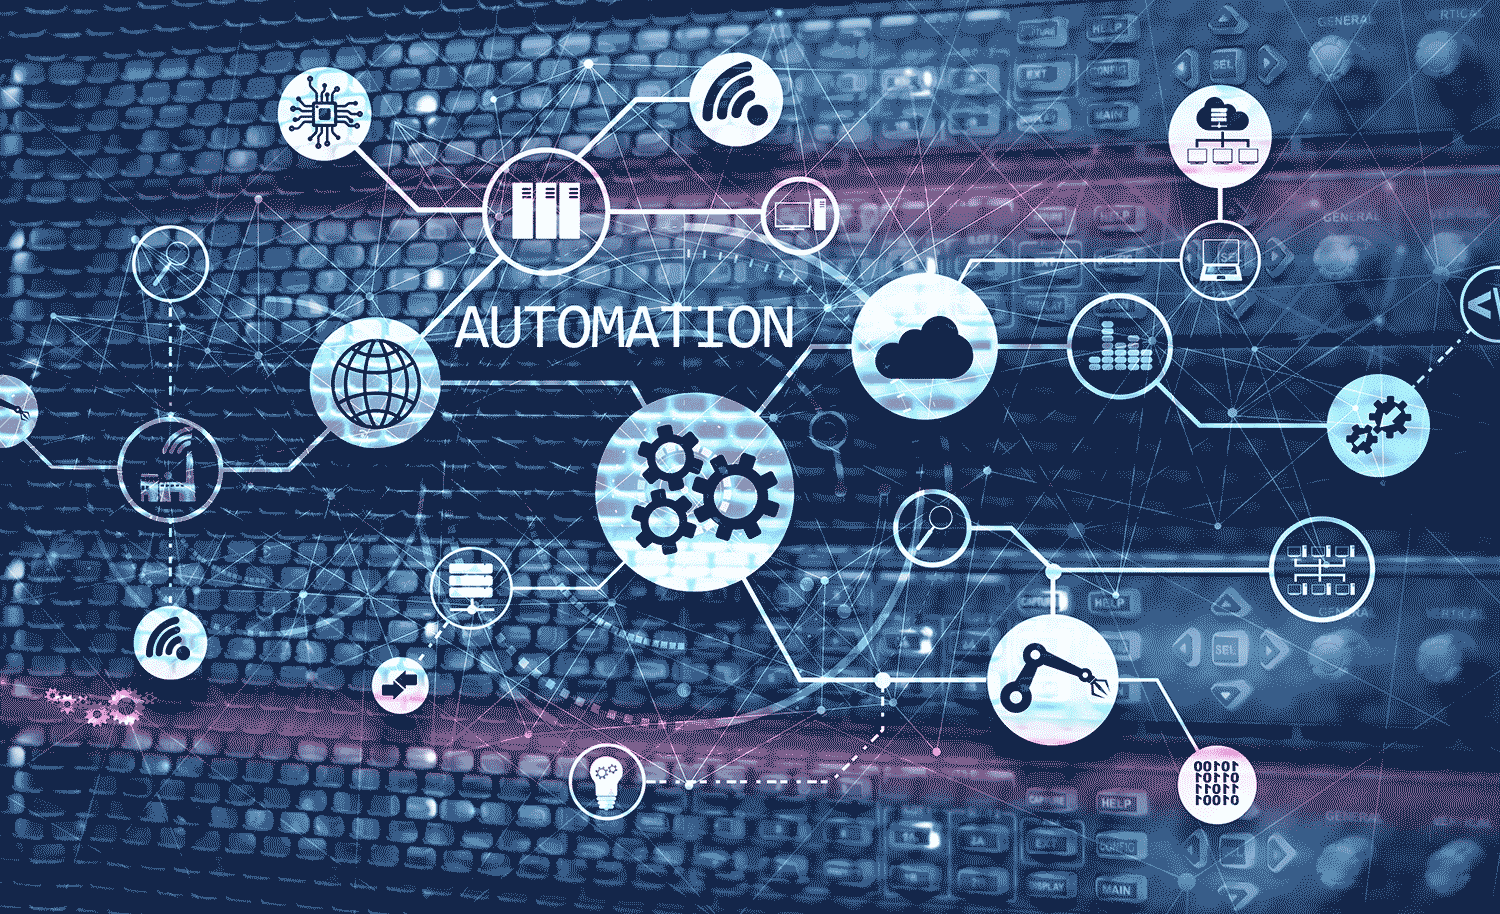 Streamline your business operations with Improved Process Automation